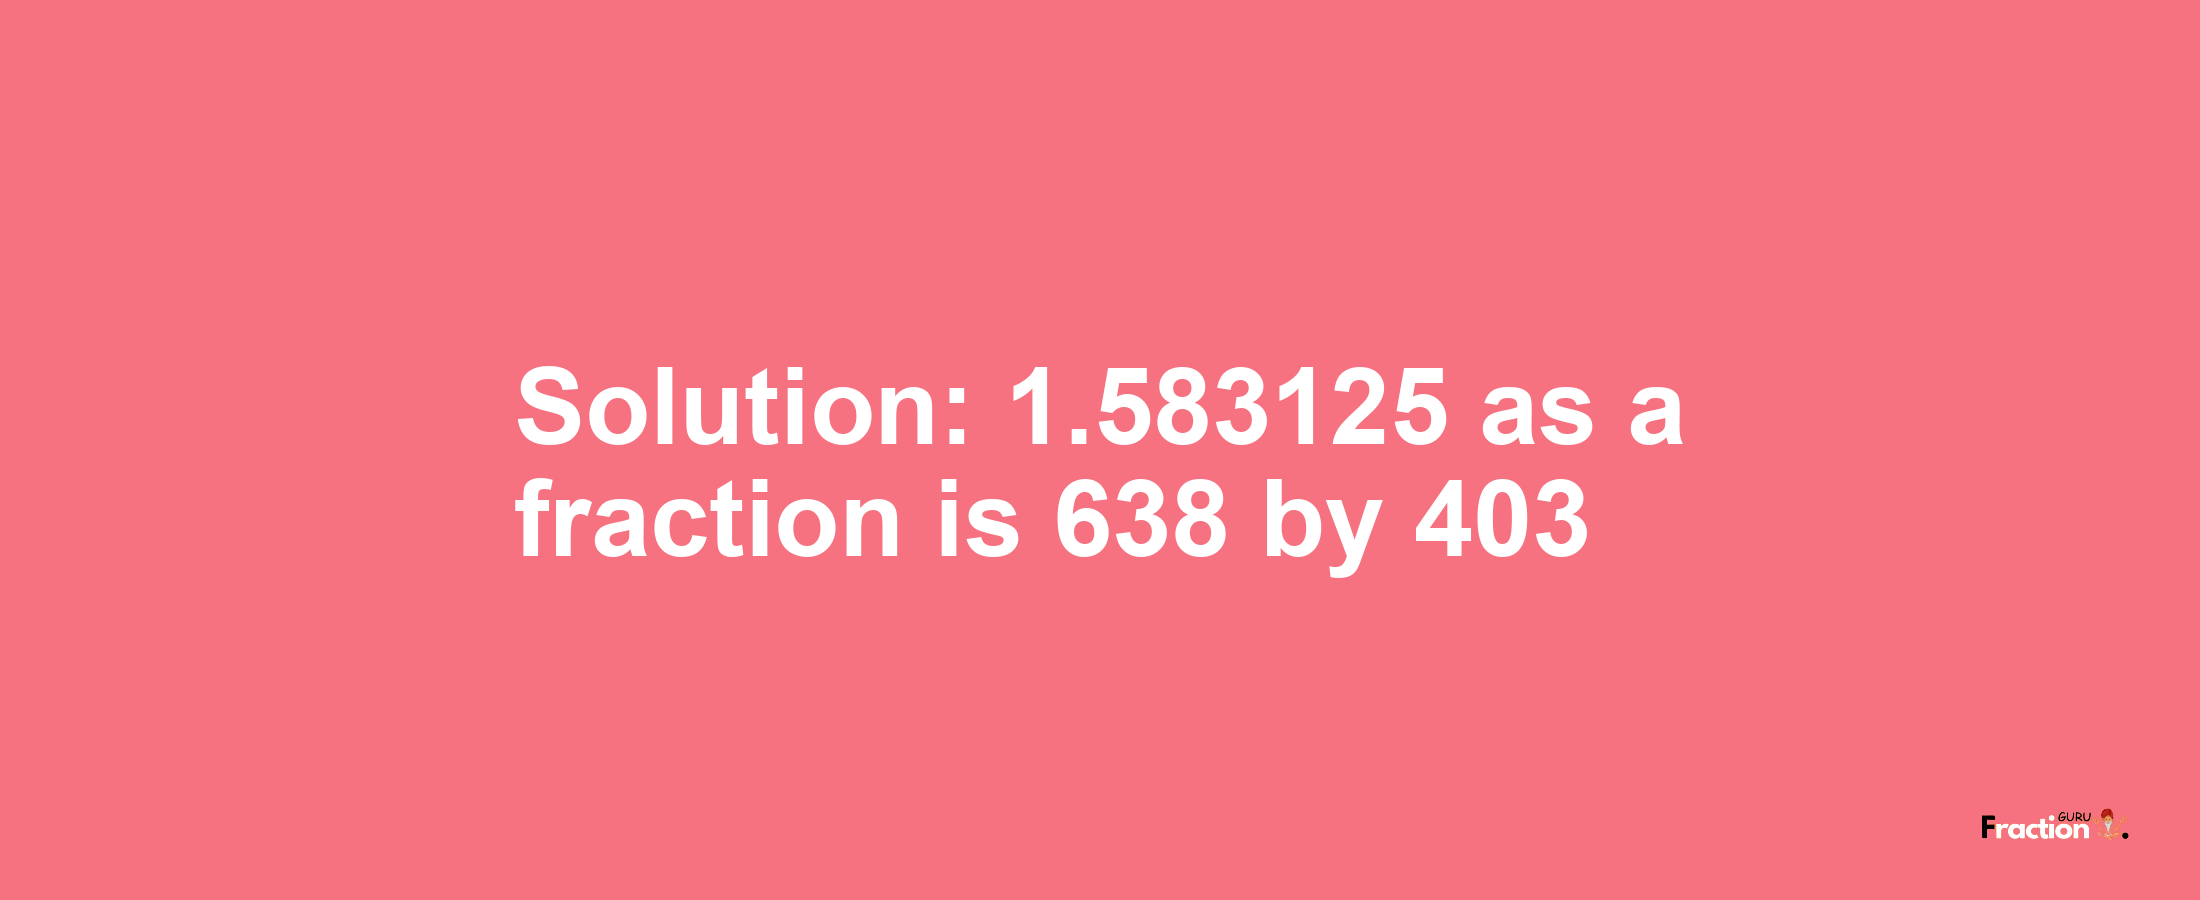 Solution:1.583125 as a fraction is 638/403